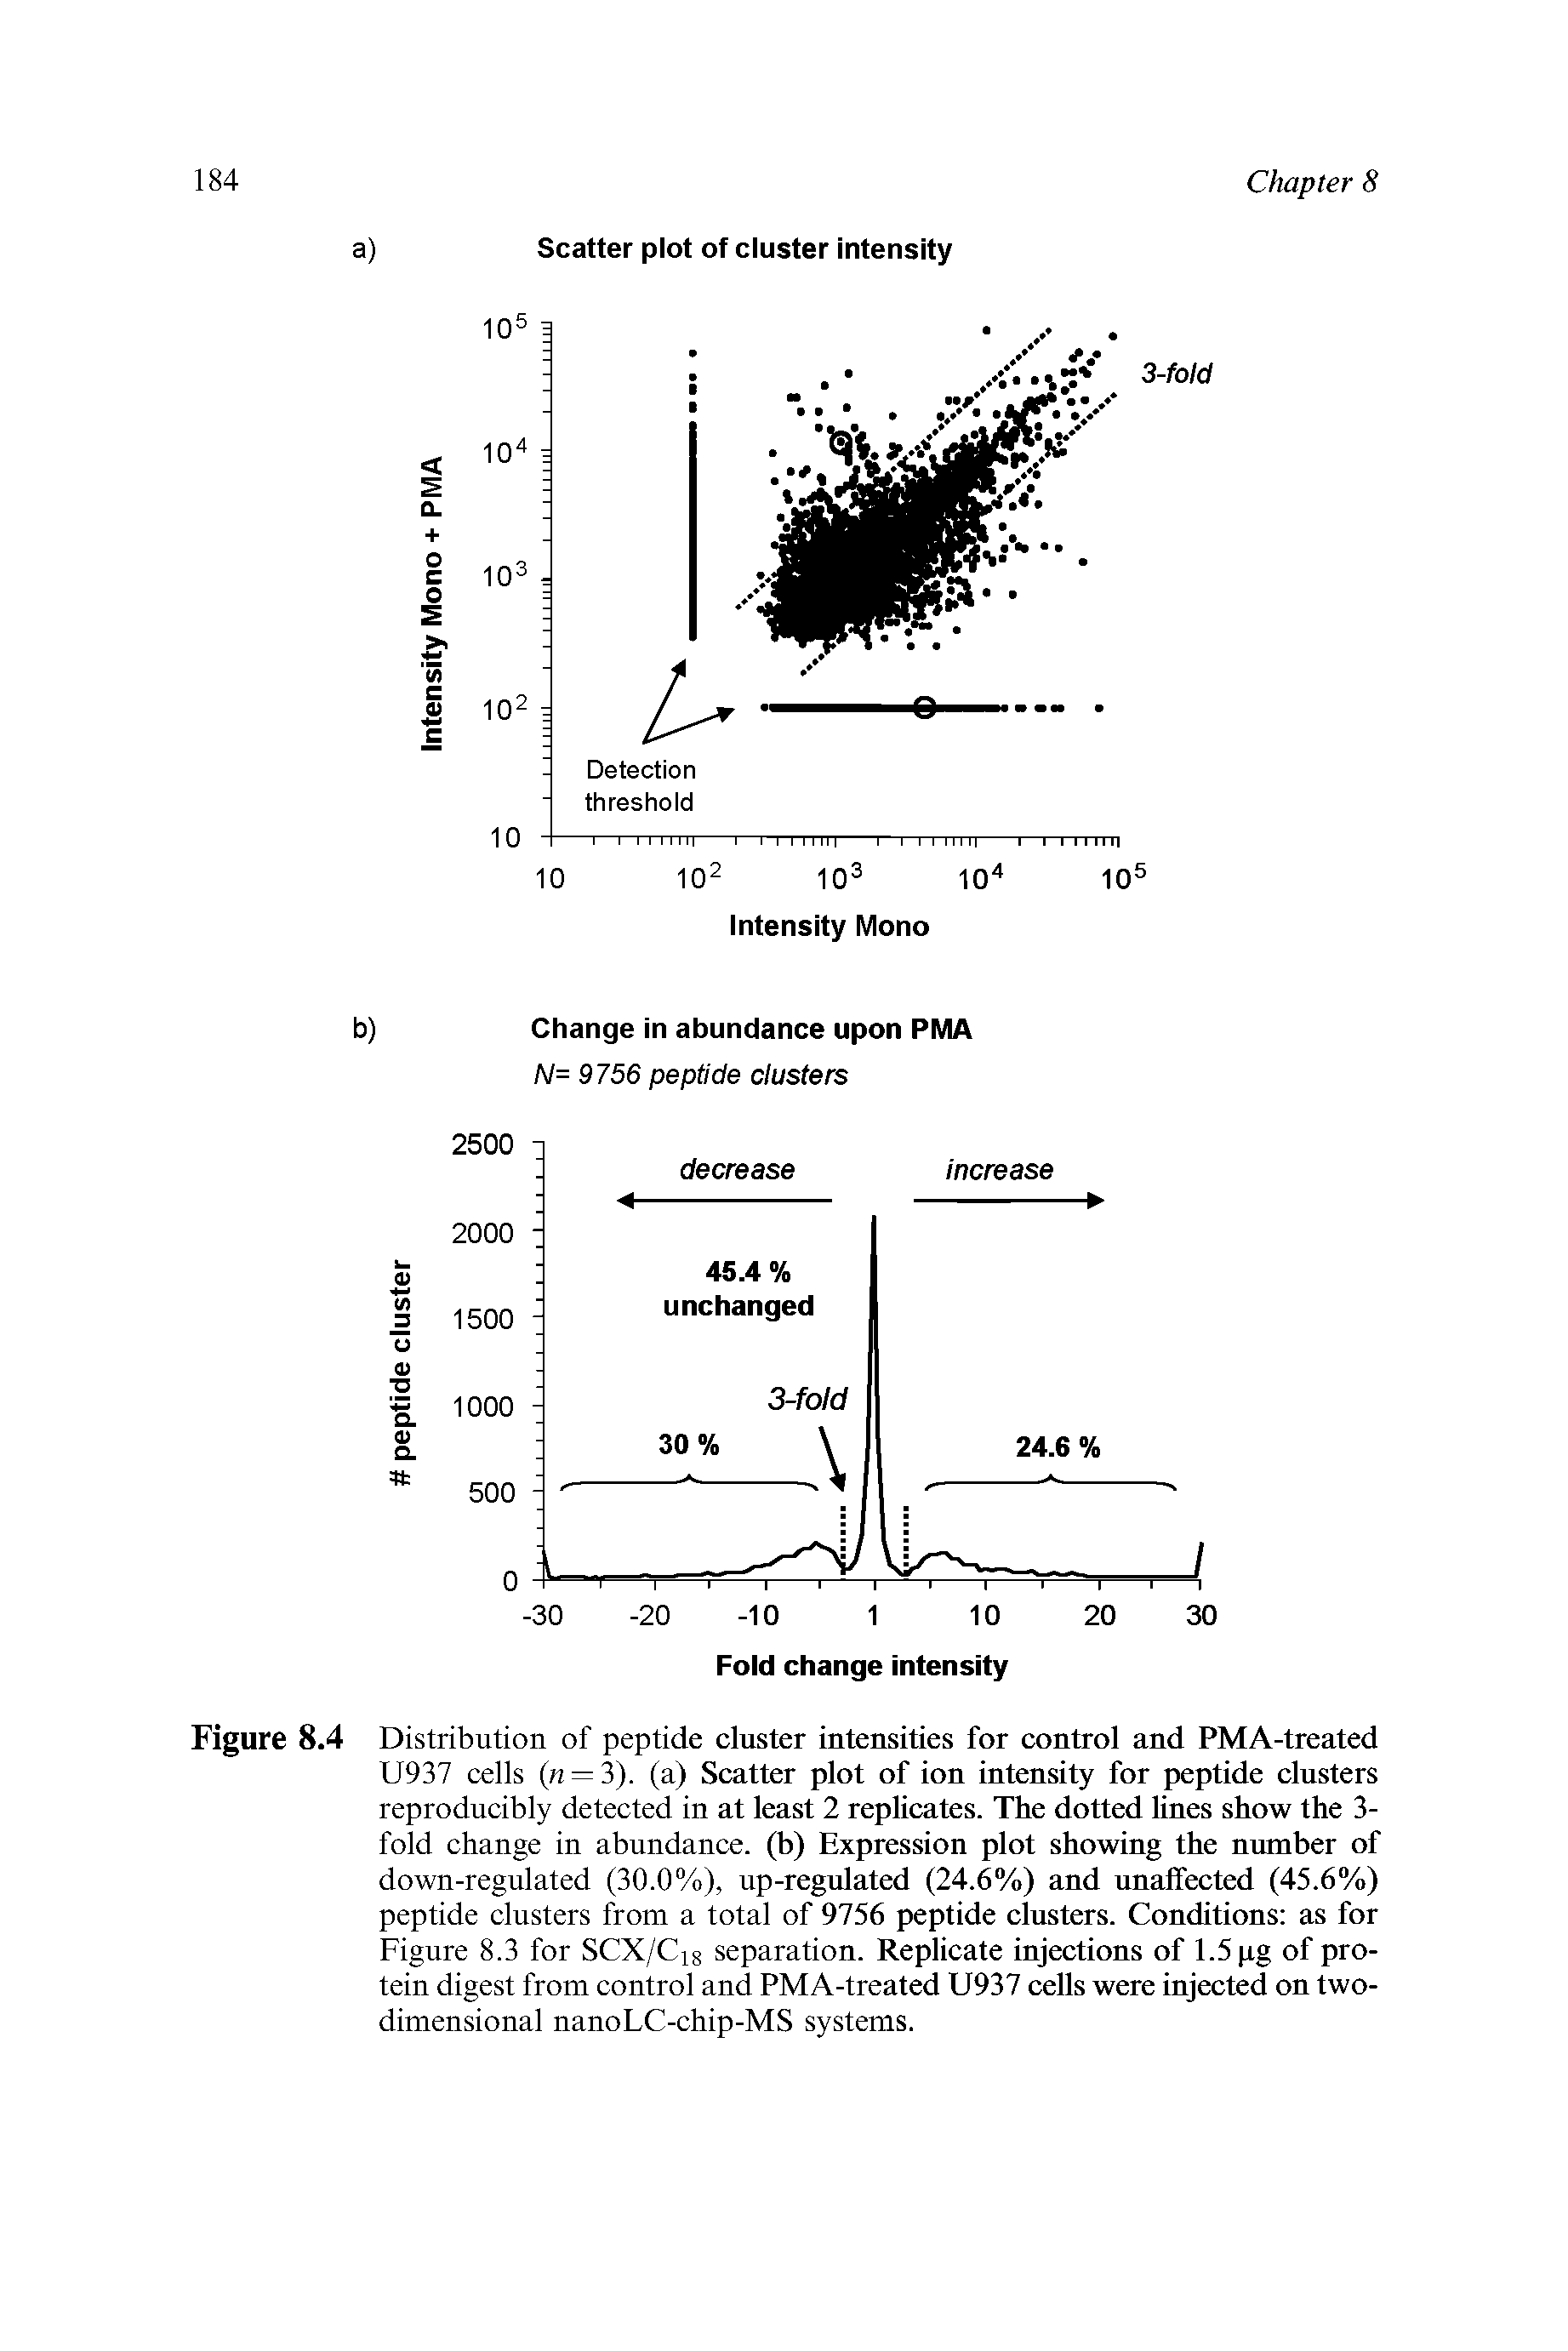 Figure 8.4 Distribution of peptide cluster intensities for control and PMA-treated U937 cells (w = 3). (a) Scatter plot of ion intensity for peptide clusters reproducibly detected in at least 2 replicates. The dotted lines show the 3-fold change in abundance, (b) Expression plot showing the number of down-regulated (30.0%), up-regulated (24.6%) and unaffected (45.6%) peptide clusters from a total of 9756 peptide clusters. Conditions as for Figure 8.3 for SCX/C18 separation. Replicate injections of 1.5 pg of protein digest from control and PMA-treated U937 cells were injected on two-dimensional nanoLC-chip-MS systems.